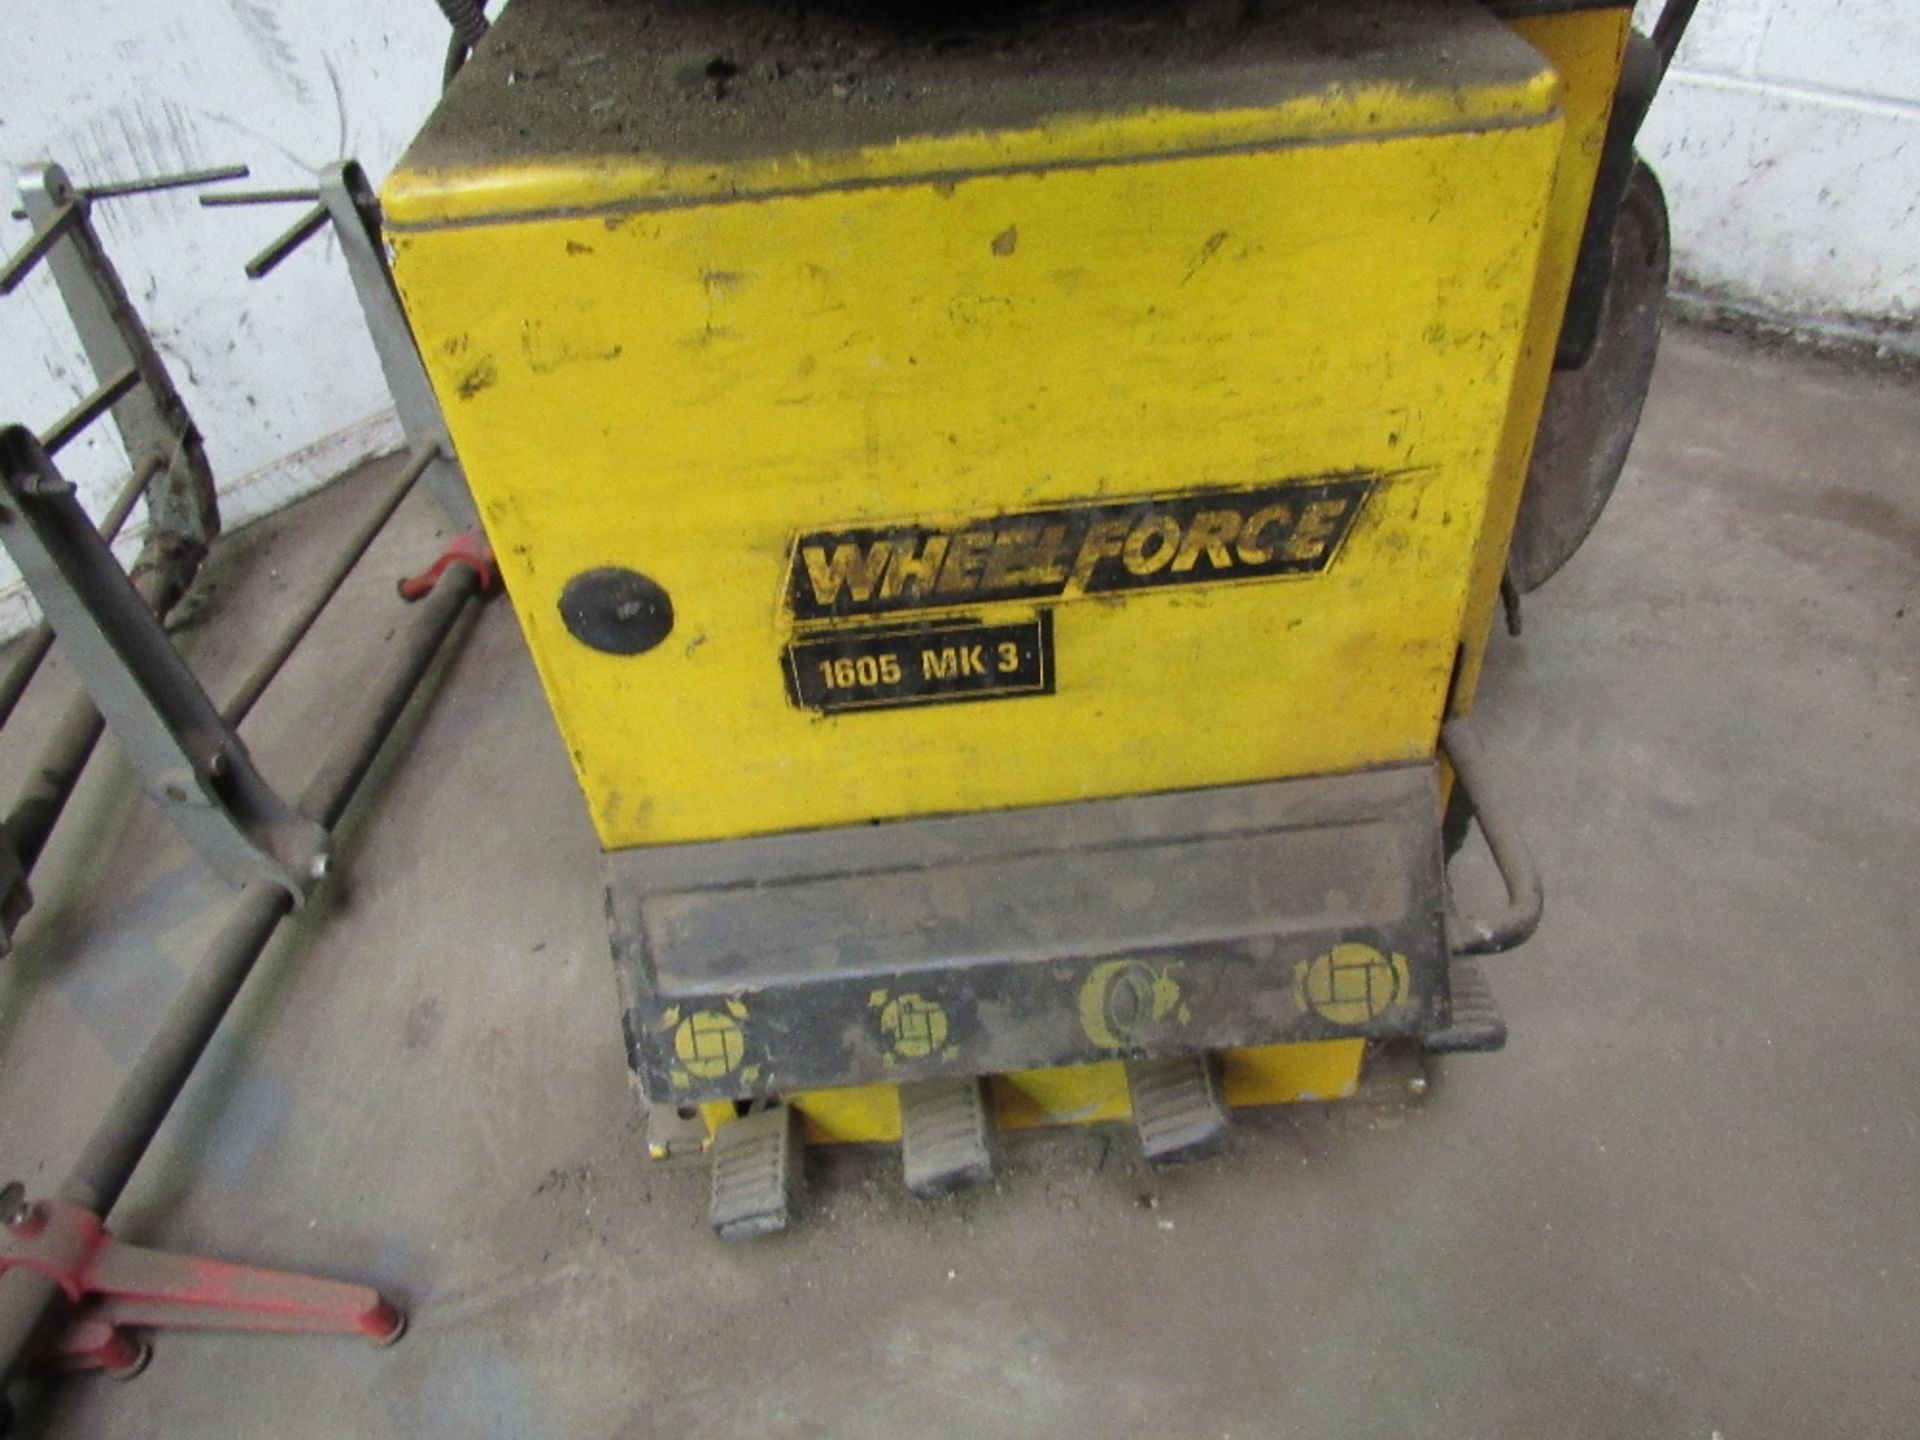 Wheel Force 1605 Mark 3 tyre charger, air operated, - Image 2 of 2